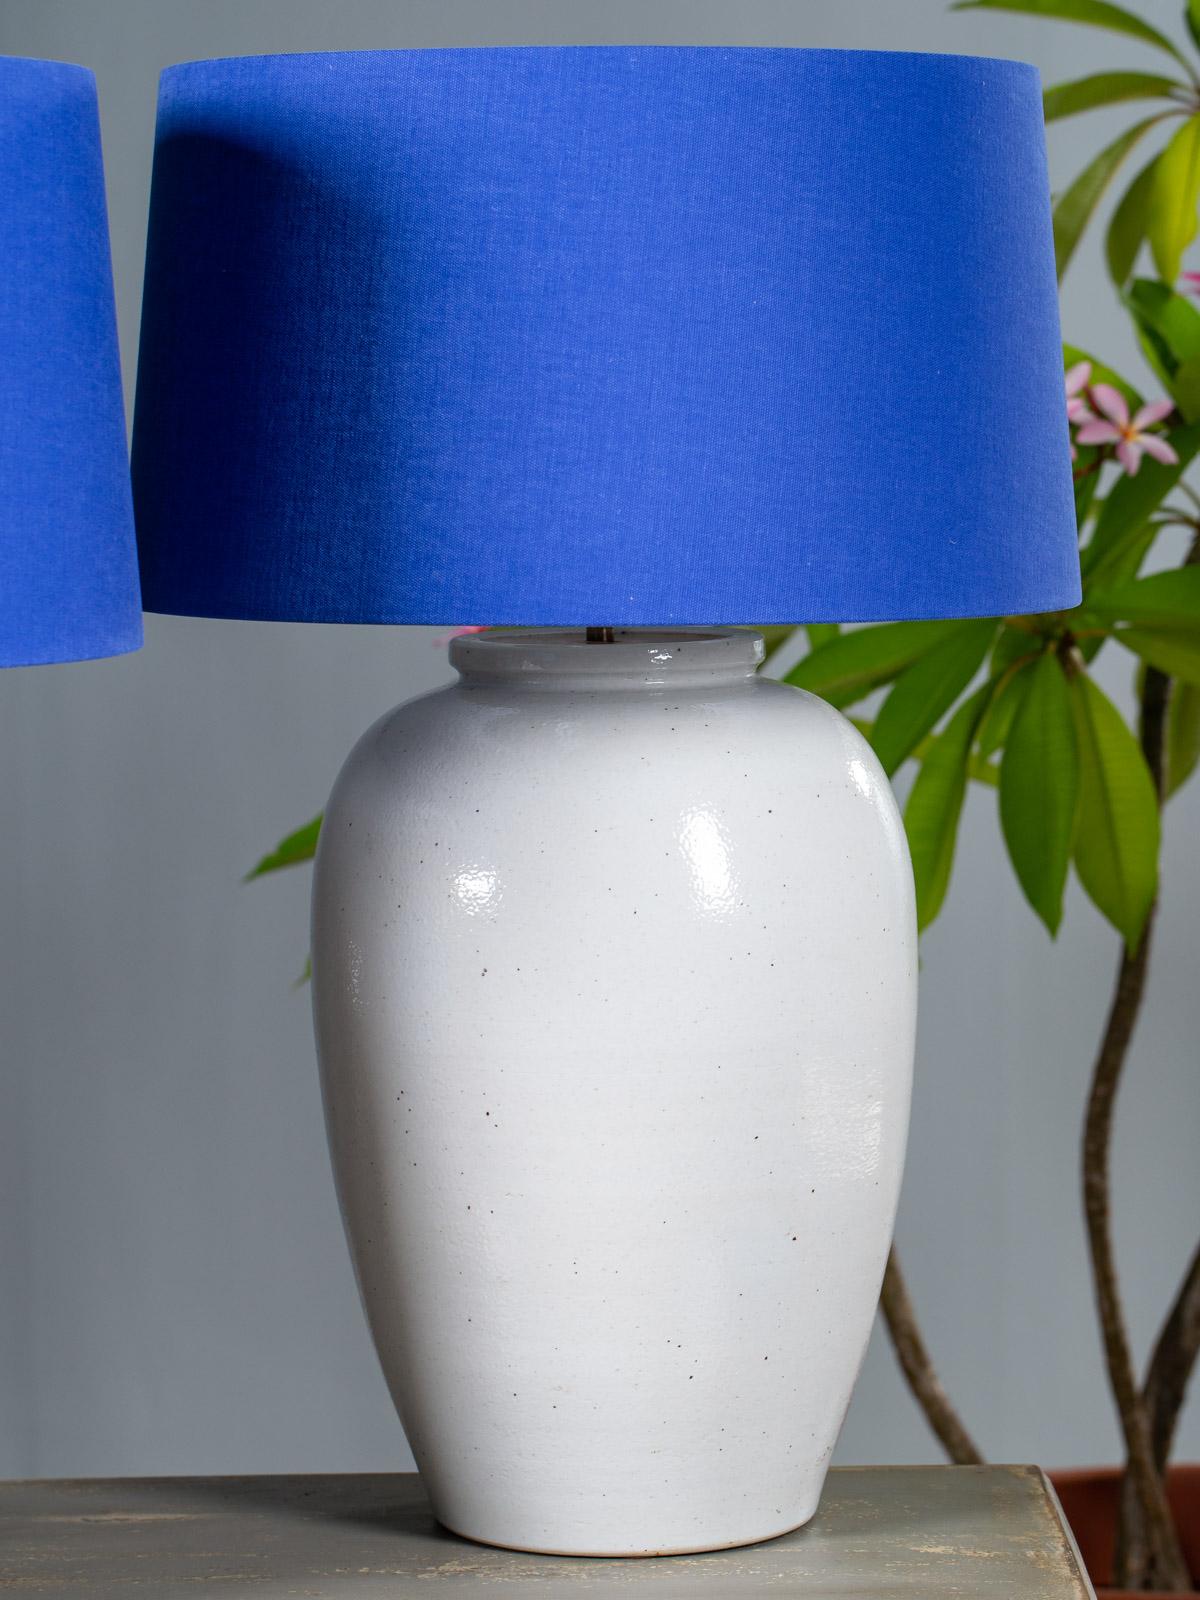 Chinese Export Pair of Large White Handmade Ceramic Modern Lamps with Delft Blue Shades